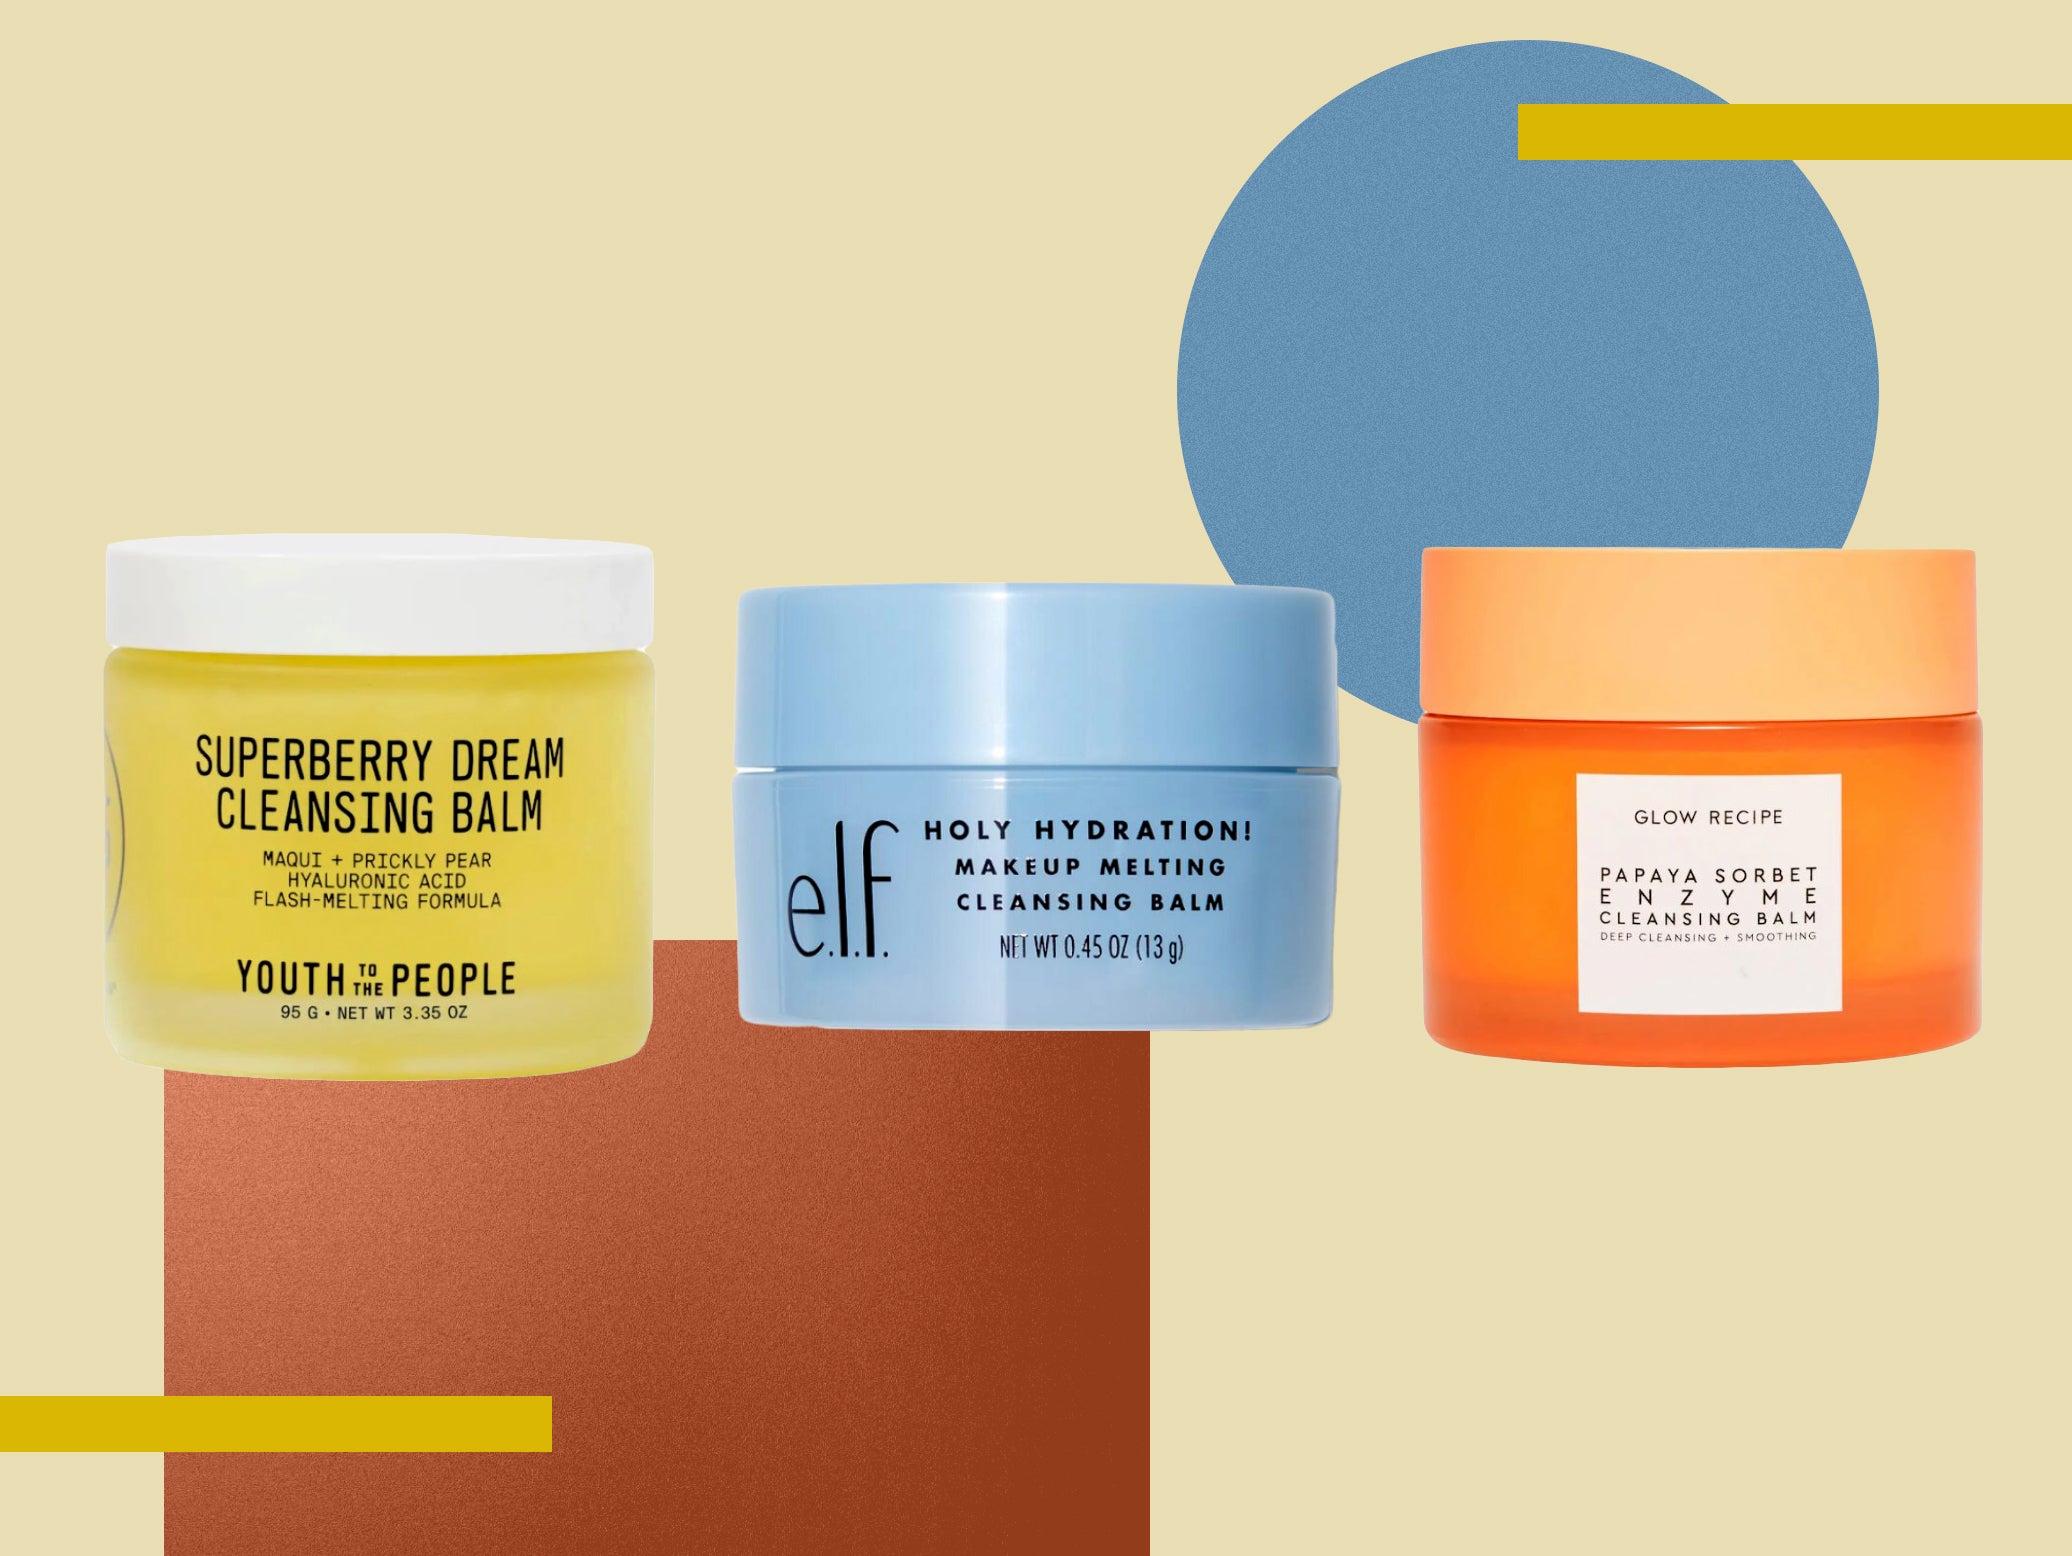 We incorporated each of these balms into our bedtime routine to see which stood out the most